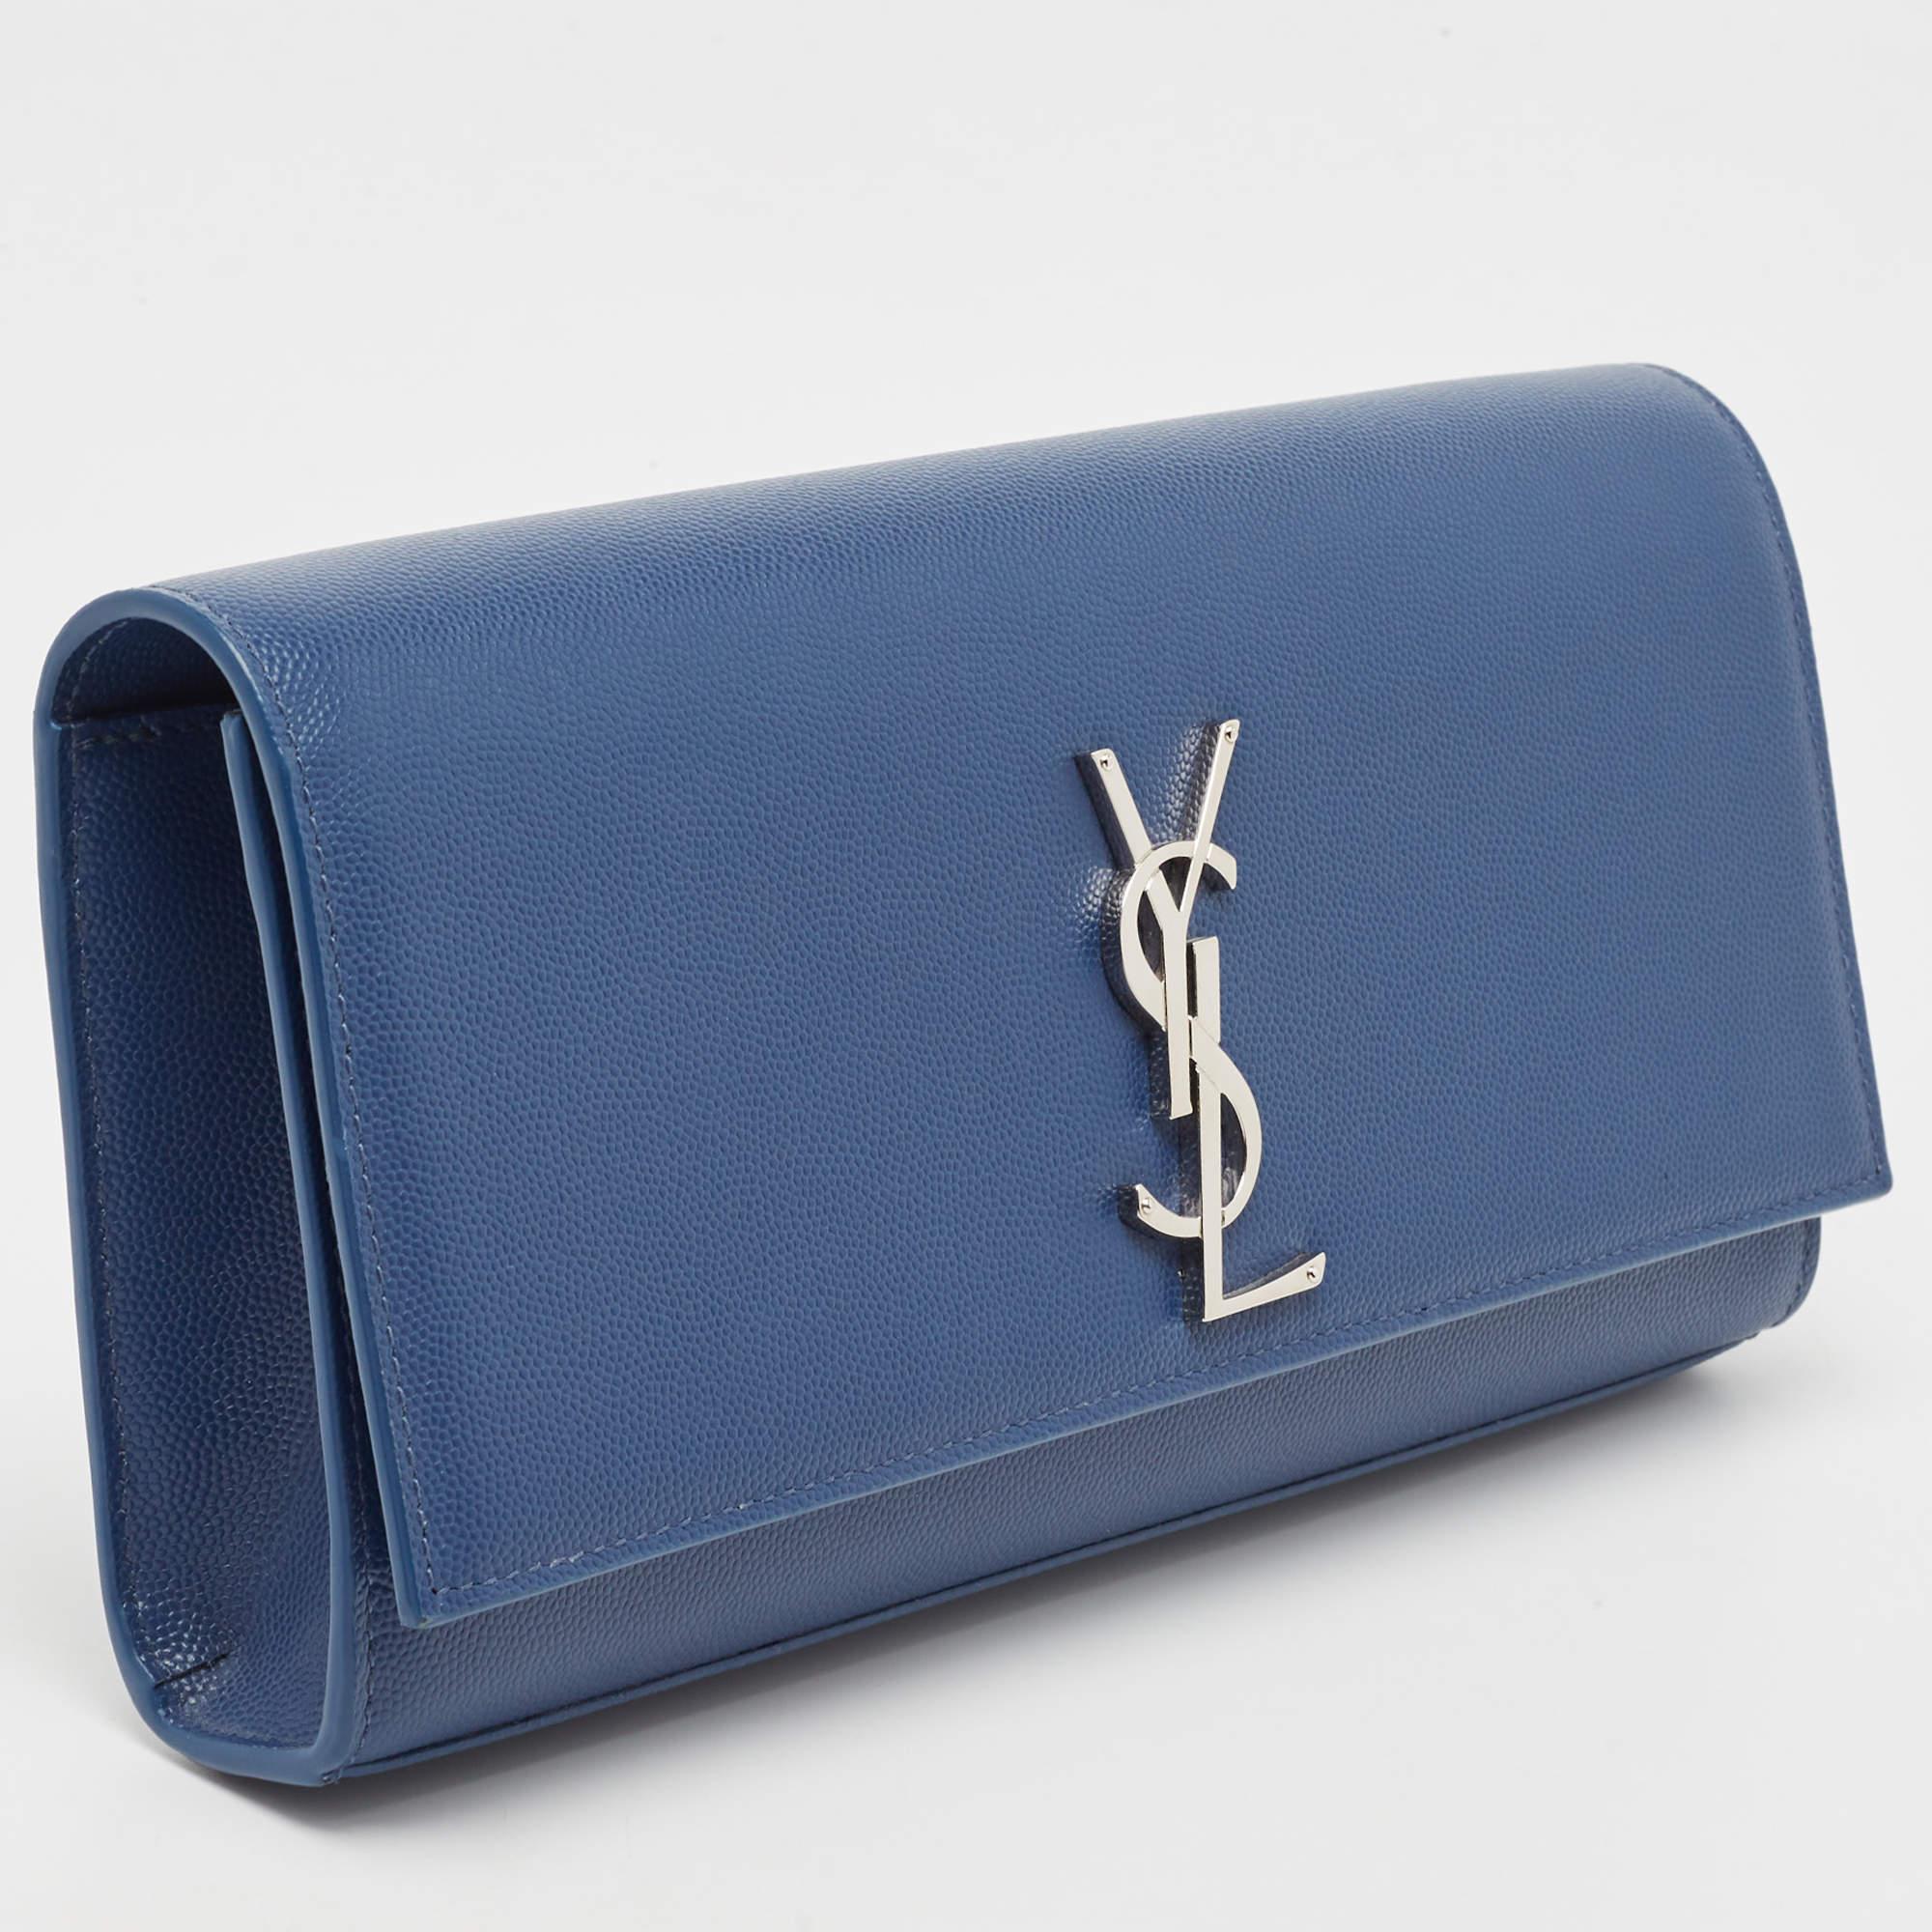 With a classic and chic style, this Saint Laurent Kate clutch will take a special place in your collection for years to come. Crafted in Italy, it is made from blue leather and has a lovely silhouette. The front flap is accented with silver-tone YSL